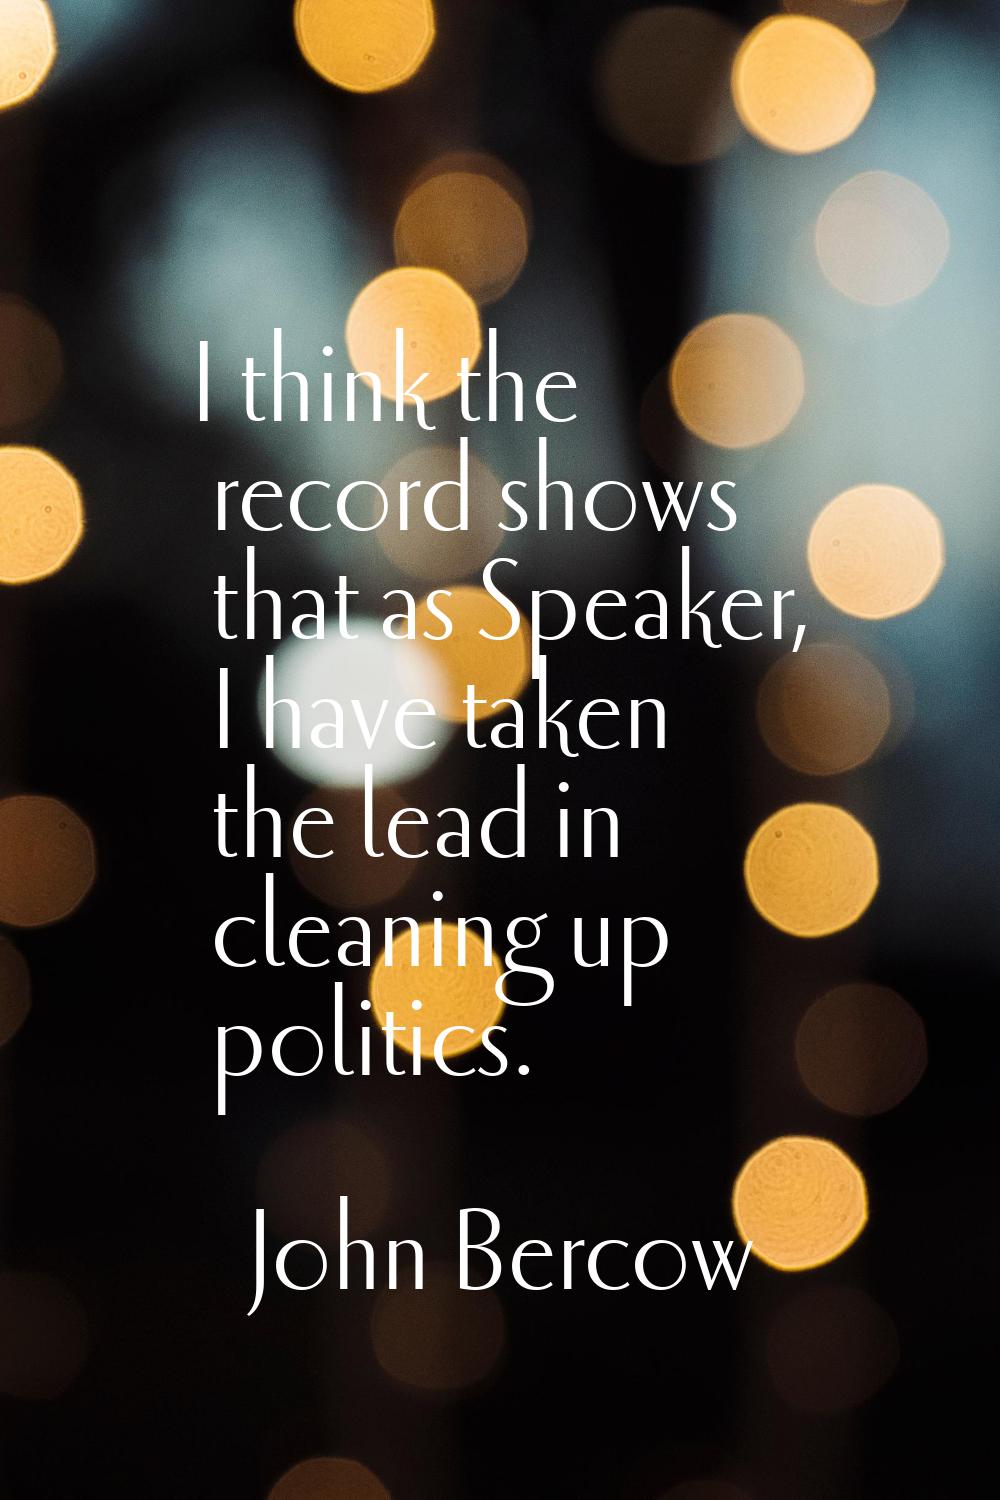 I think the record shows that as Speaker, I have taken the lead in cleaning up politics.